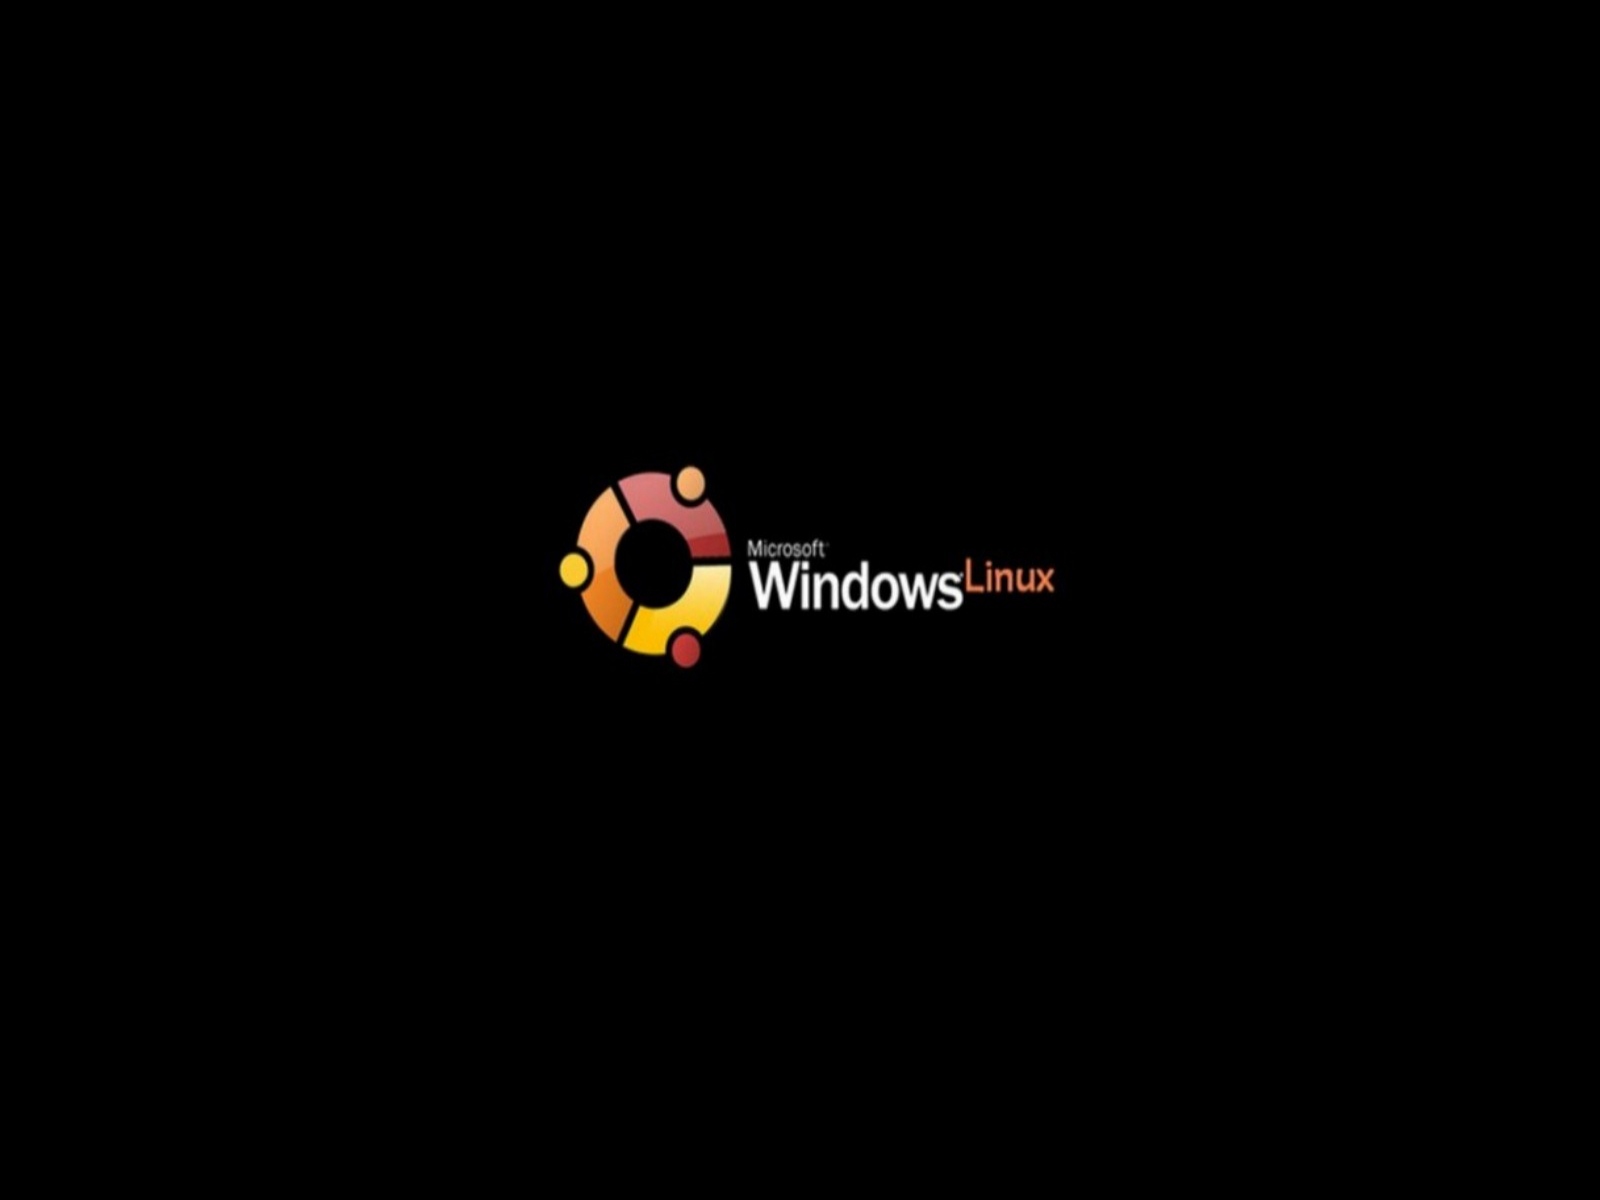 Free download Linux Windows Wallpaper Widescreen windows or linux [1600x1200] for your Desktop, Mobile & Tablet. Explore Linux Windows Wallpaper. Best Linux Wallpaper, Linux Wallpaper, Linux Girls Wallpaper